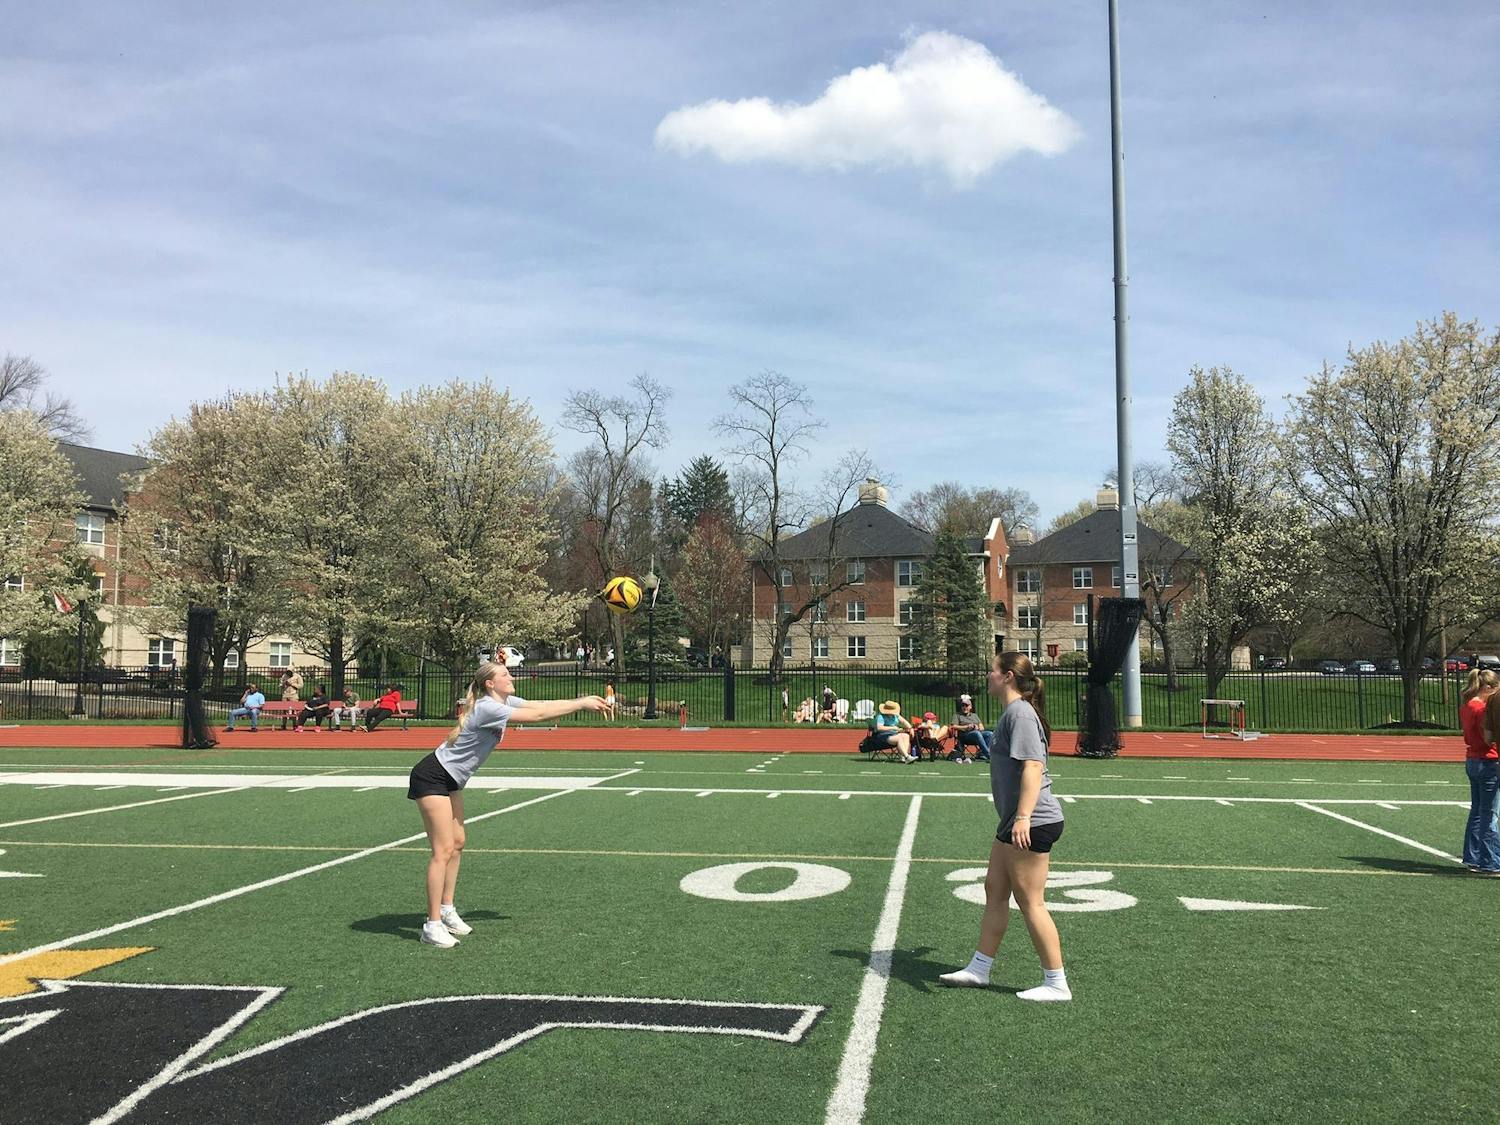 Two girls both in gray shirts and black shorts pass a volleyball between each other on a football field.